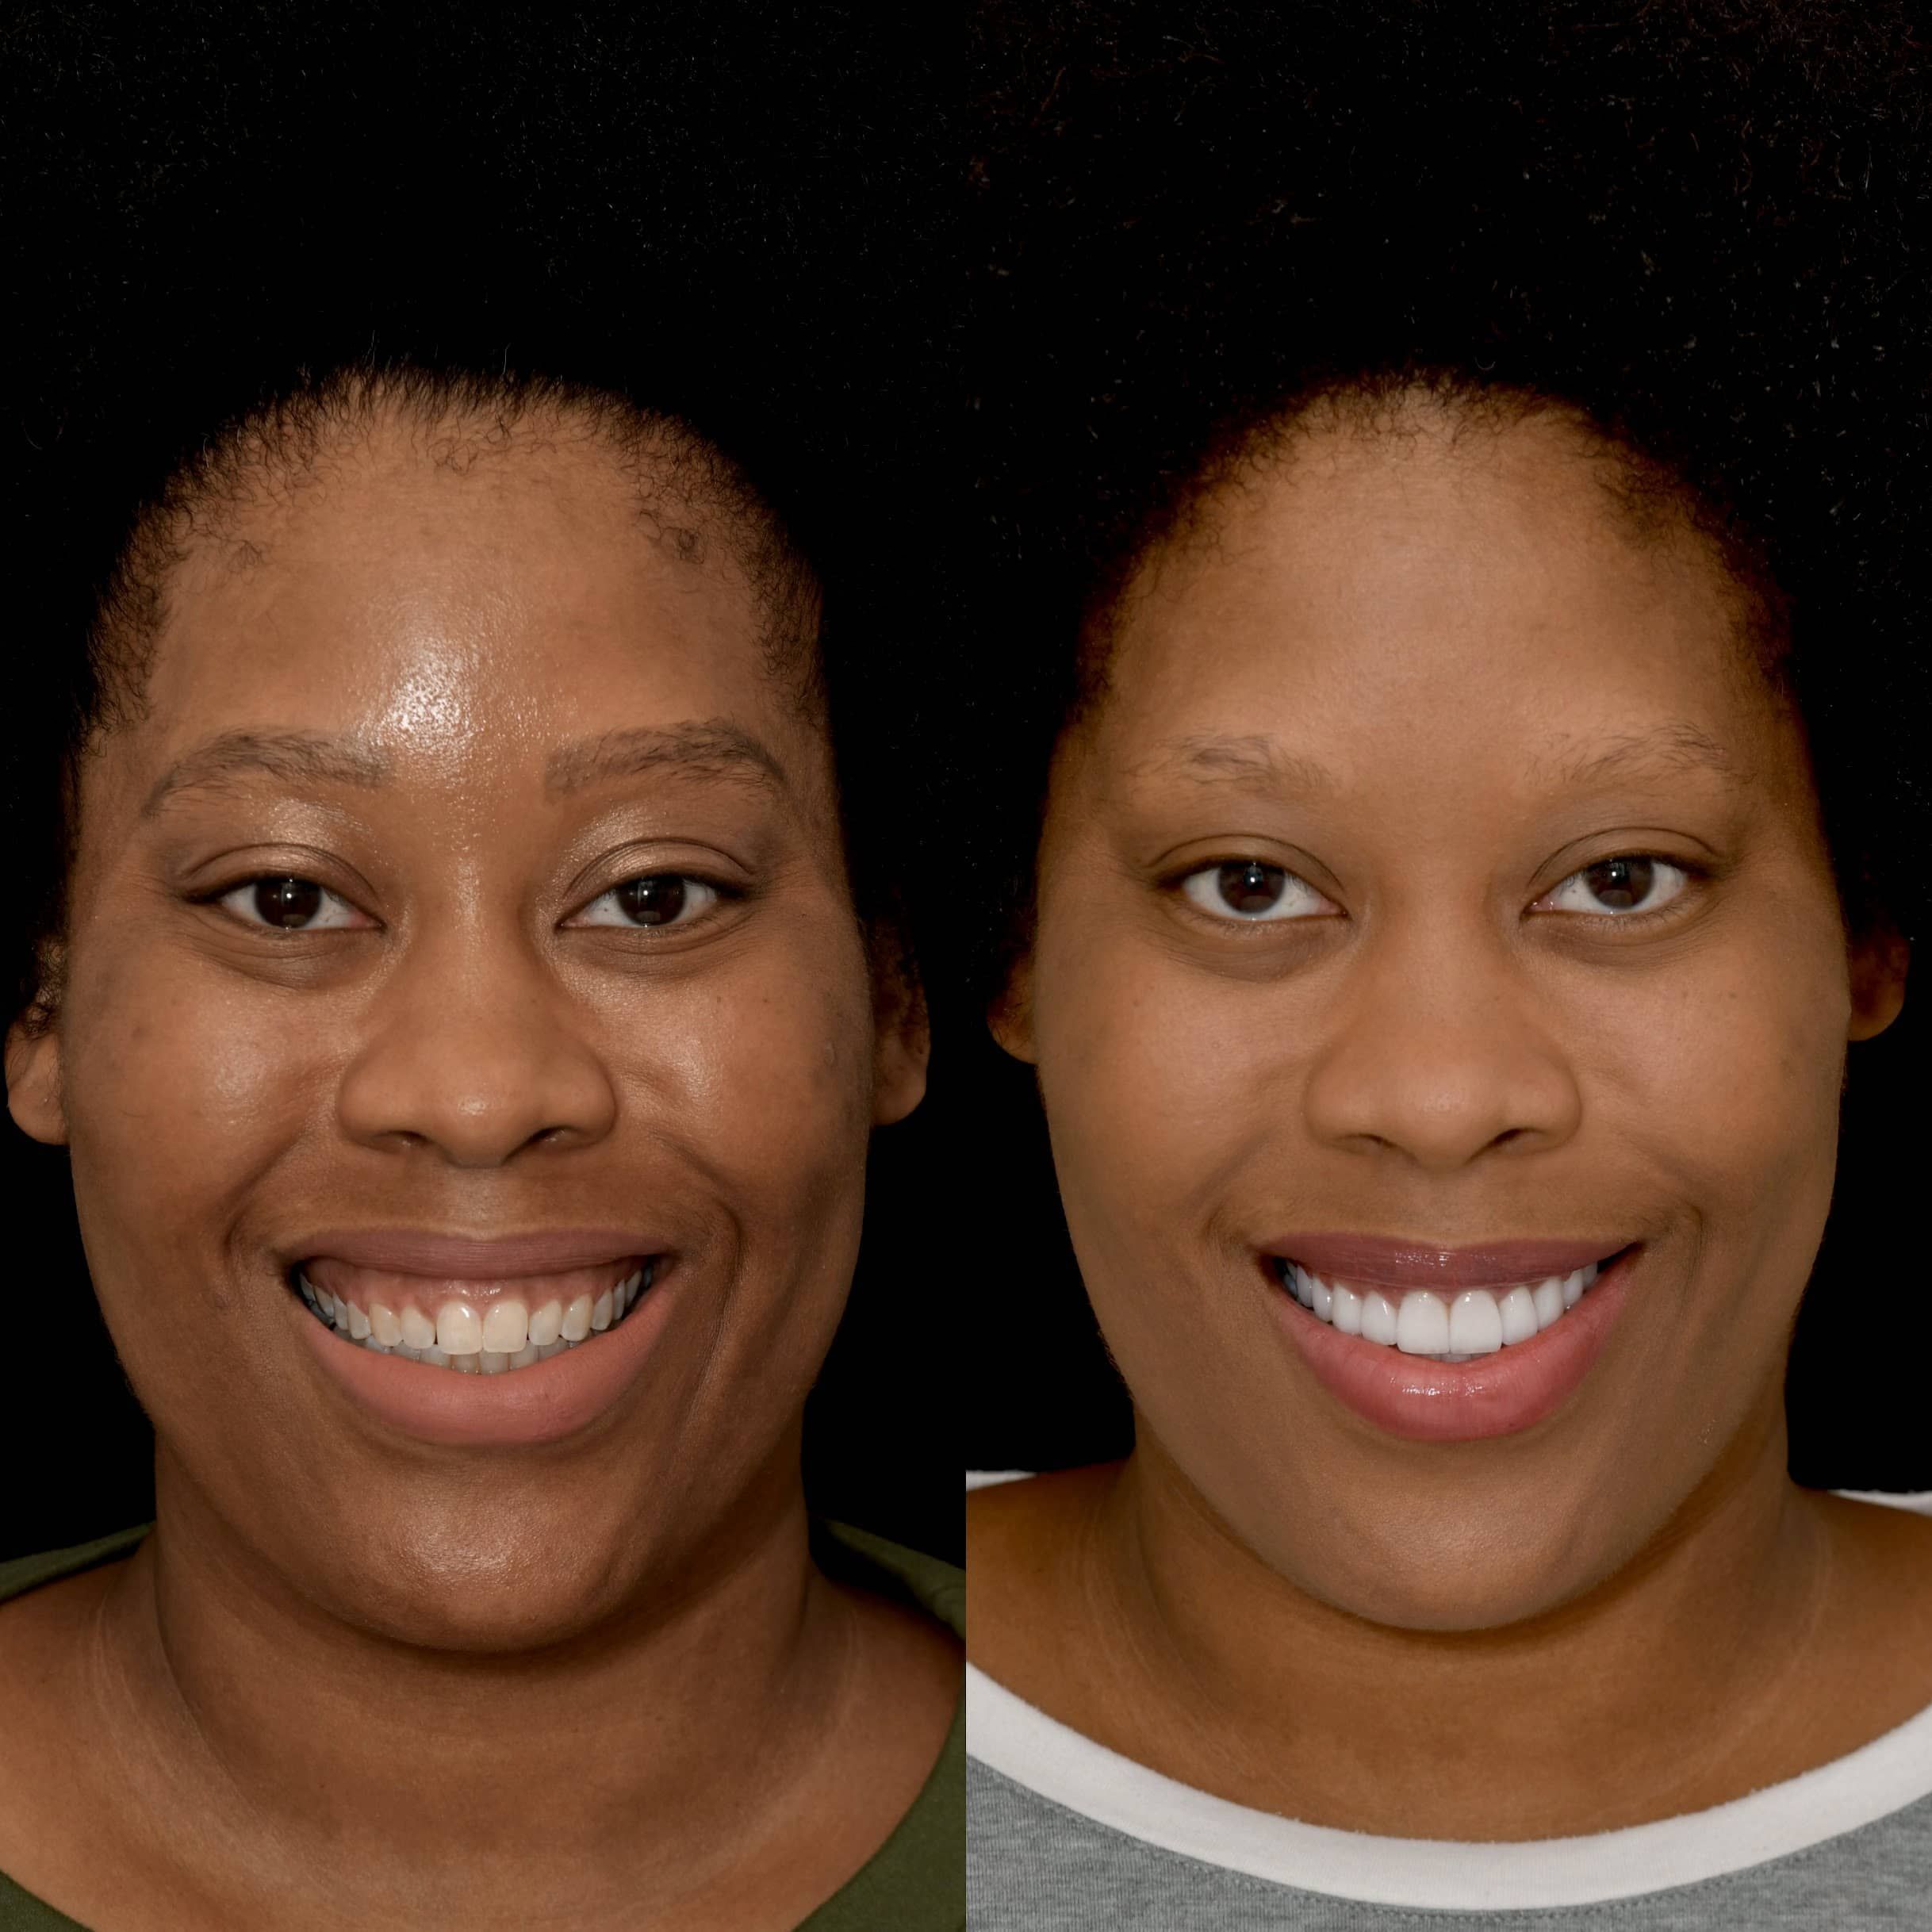 Before and after of veneers procedure by dentist in Beverly Hills